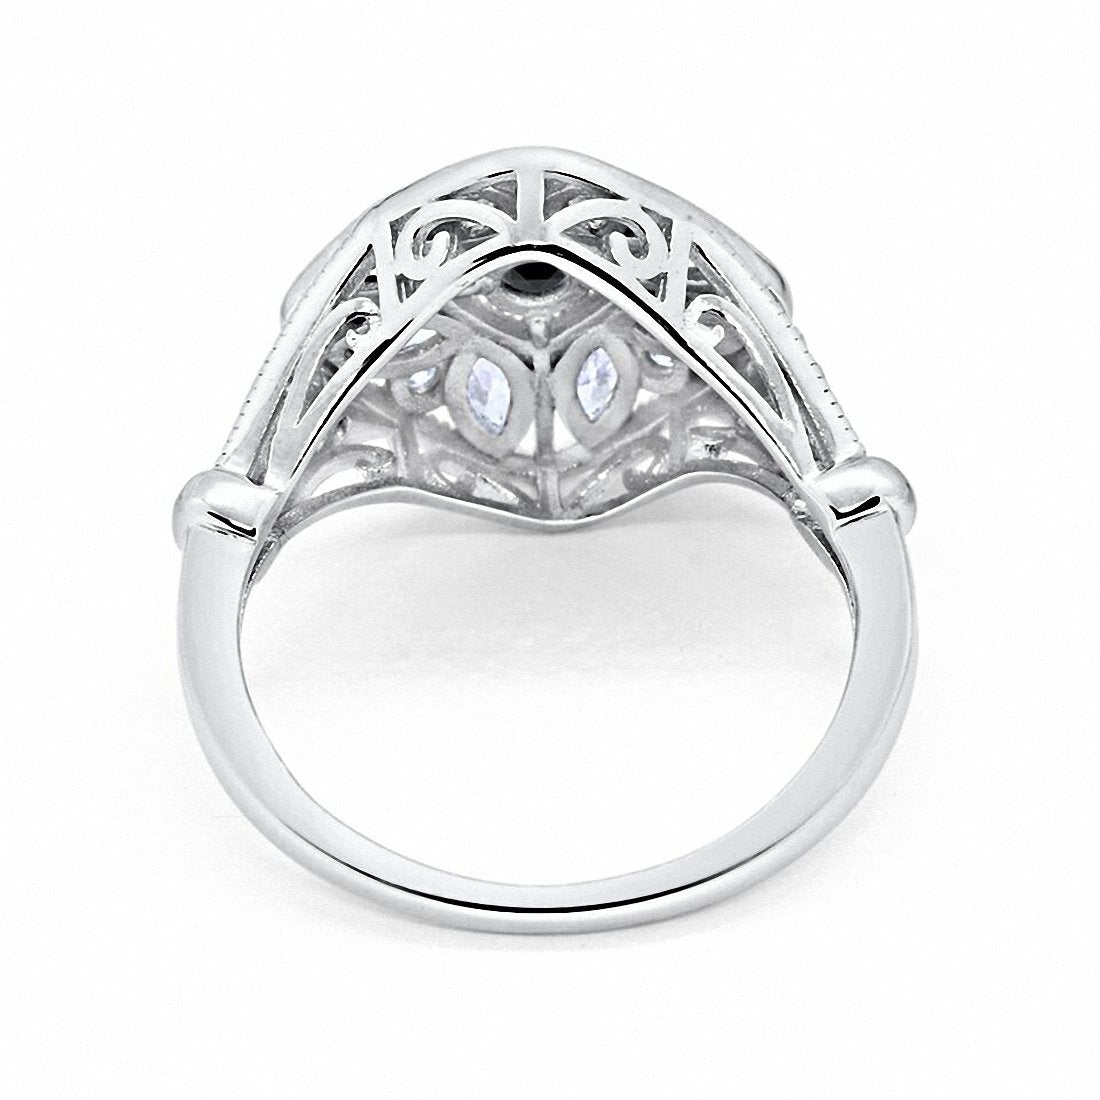 Art Deco Ring Marquise Filigree Simulated Black CZ 925 Sterling Silver